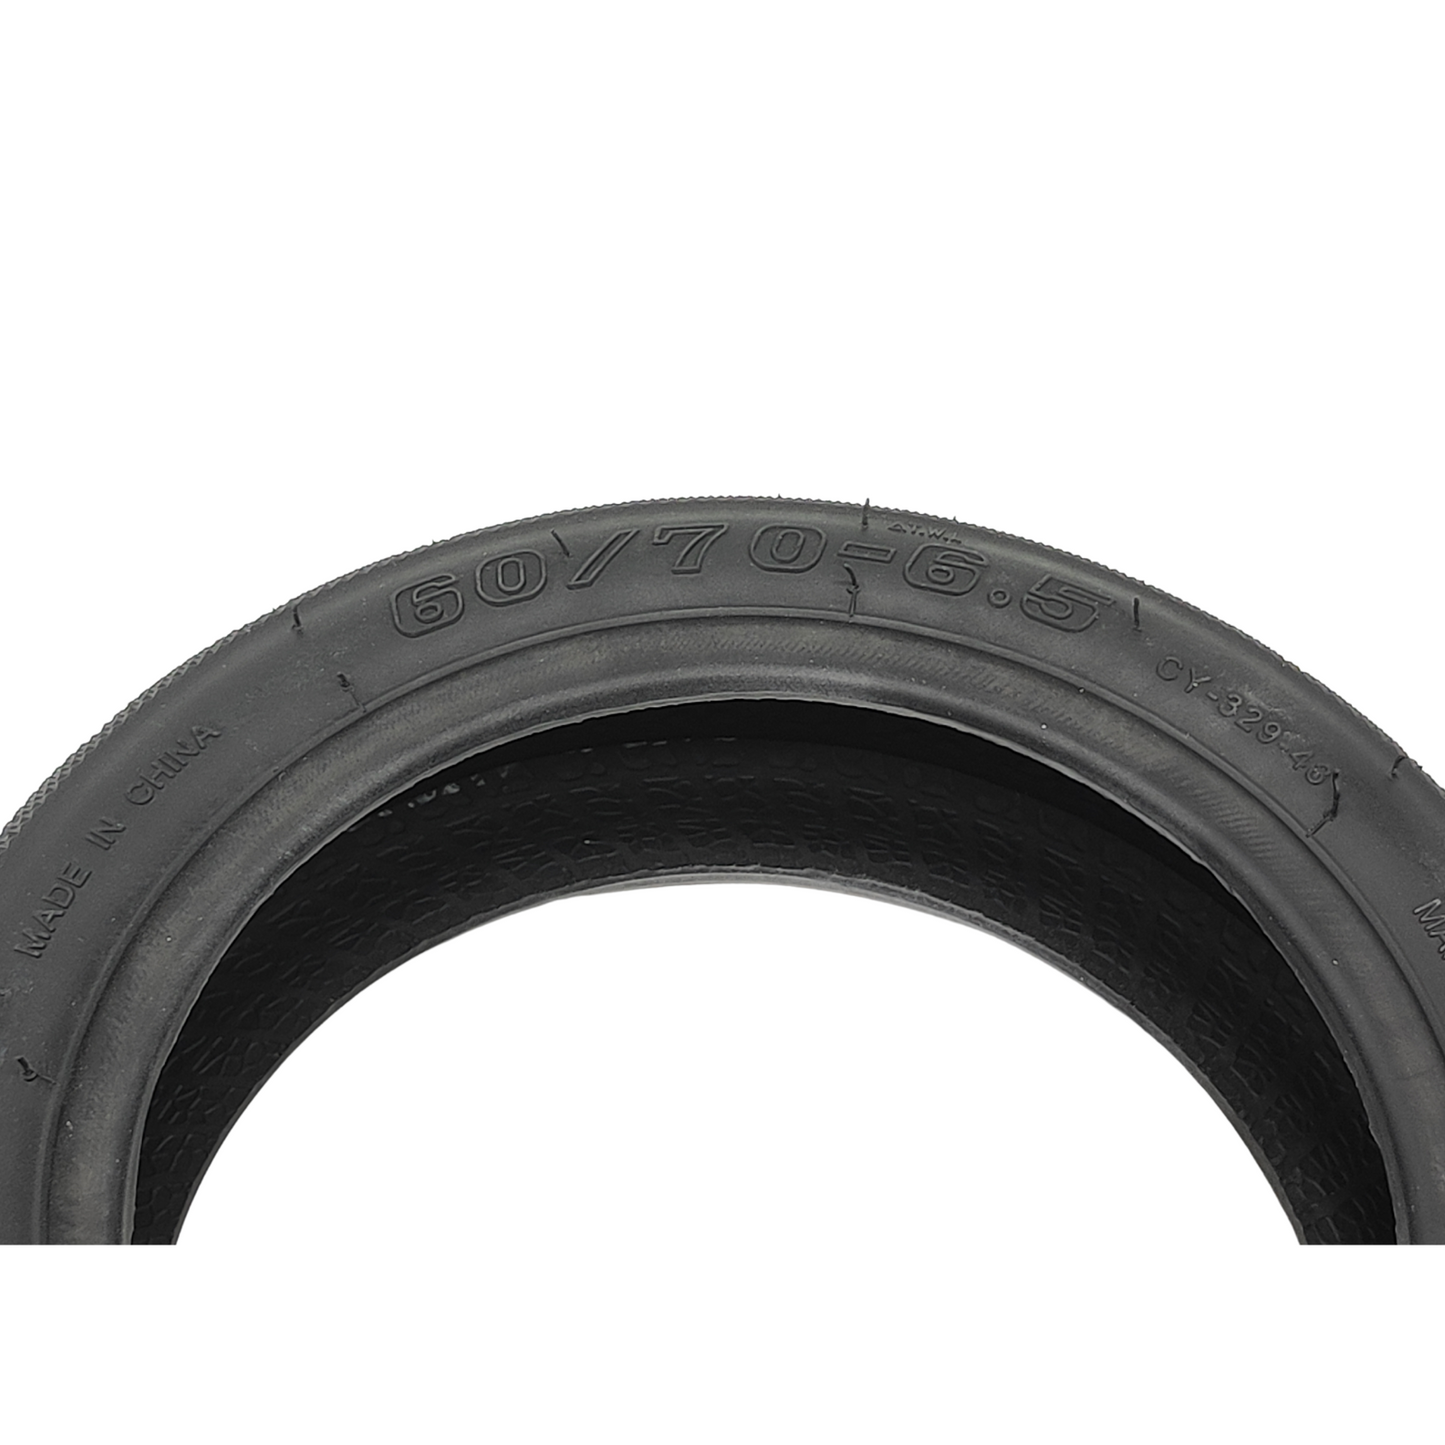 Ninebot Max G30 Tire 60/70-6.5 Tire Tubeless with Gel OEM